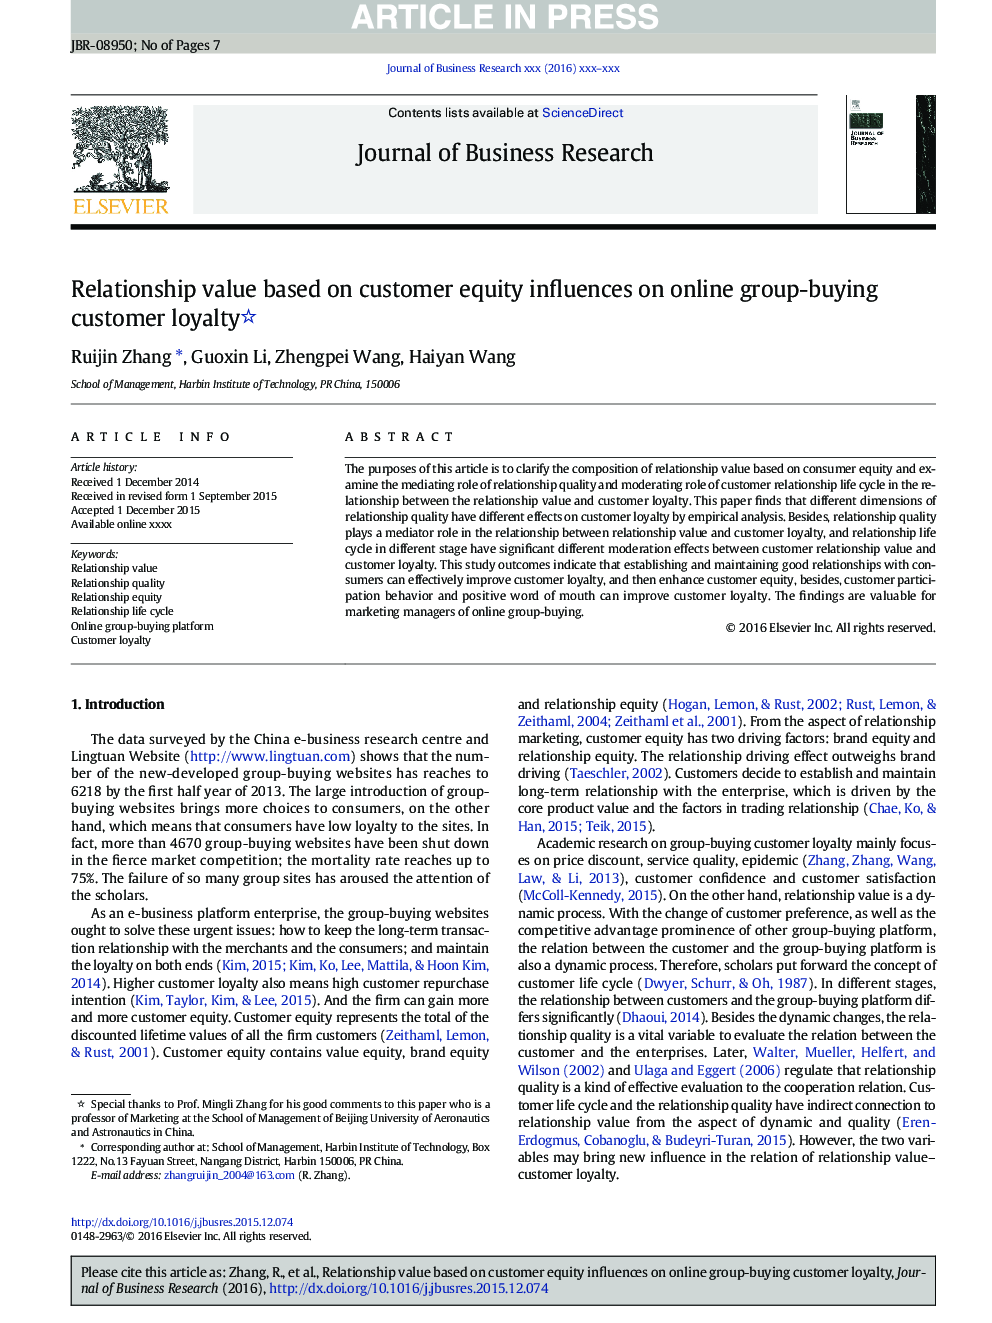 Relationship value based on customer equity influences on online group-buying customer loyalty